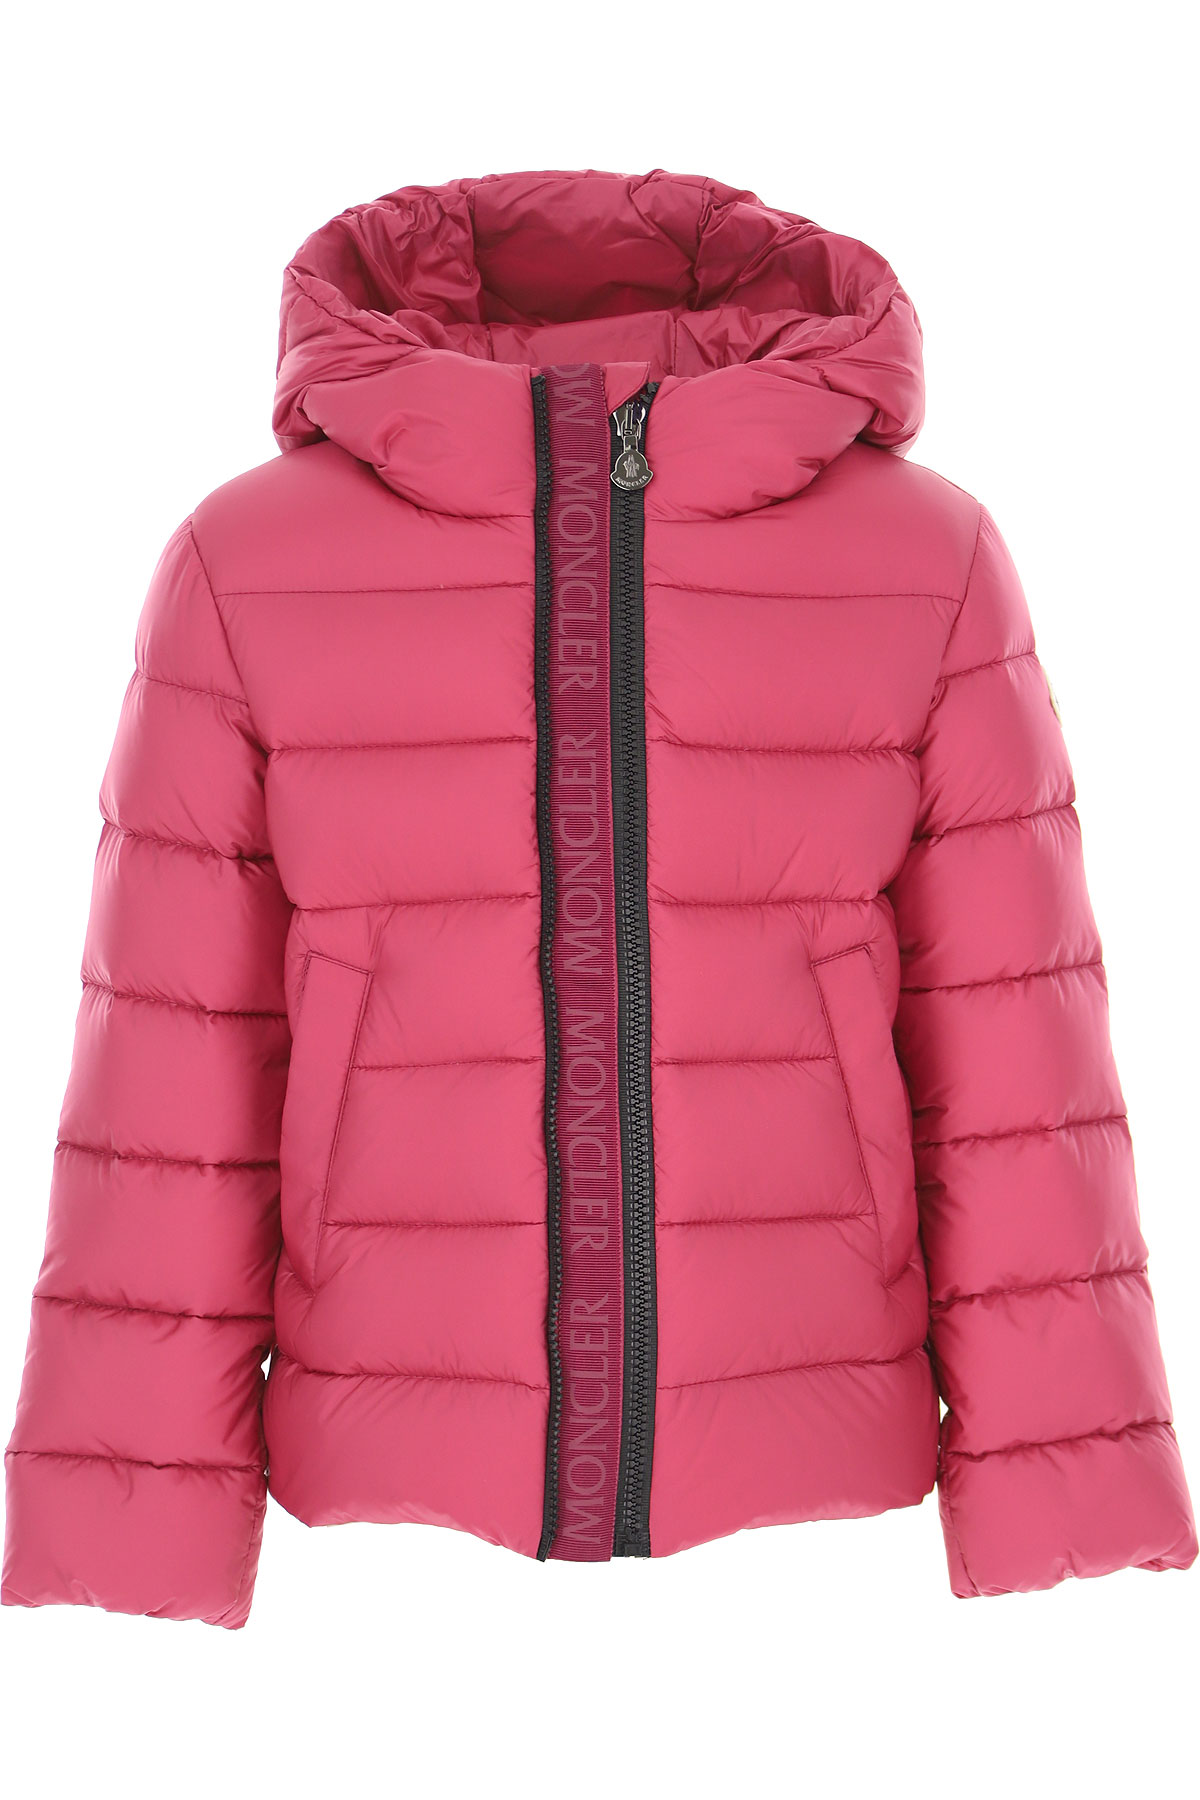 Girls Clothing Moncler, Style code: 1a53510-53048-485